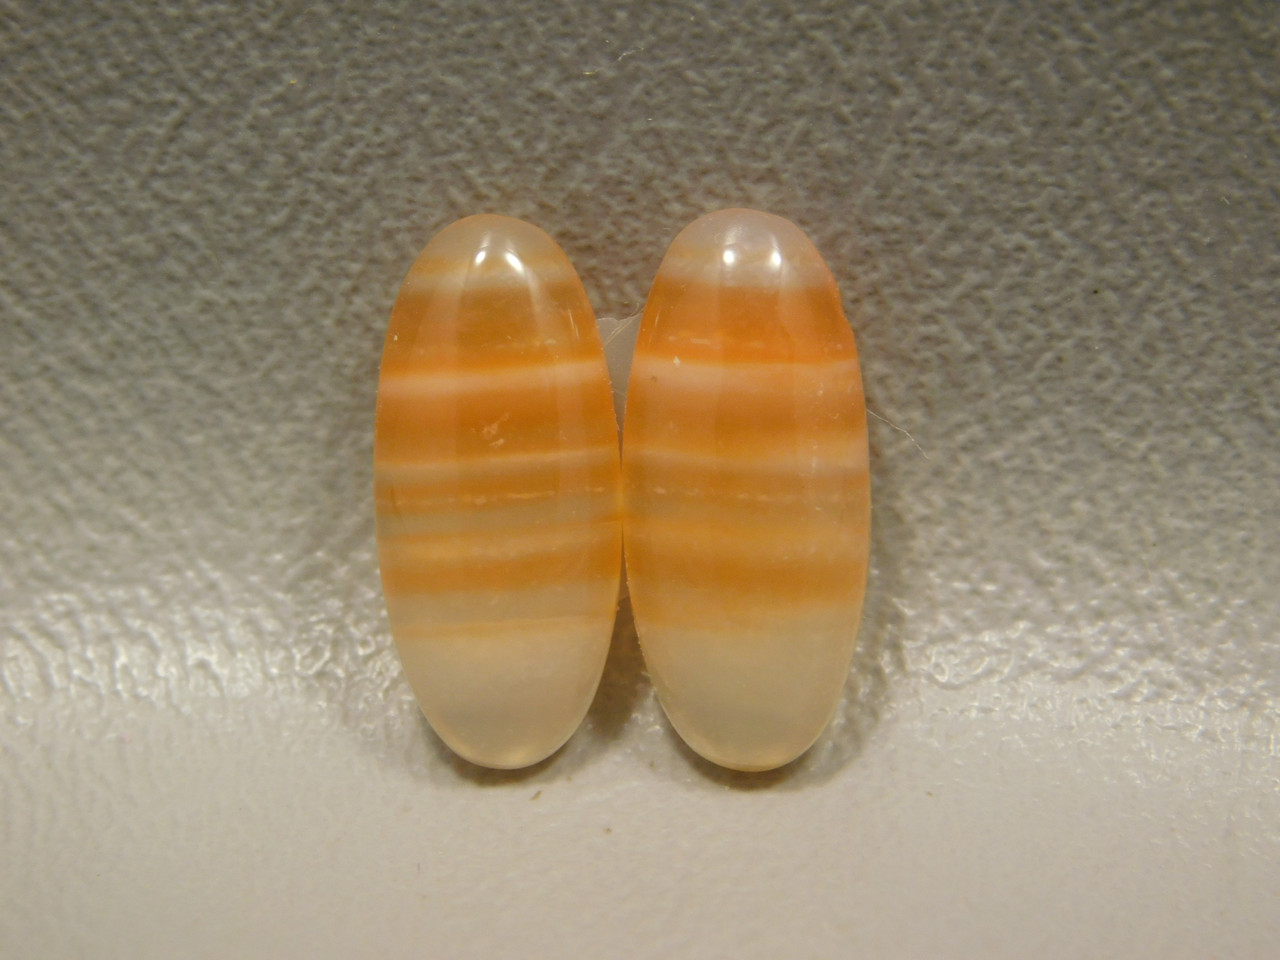 Carnelian Orange and White Stone Cabochons Earring Matched Pairs #6